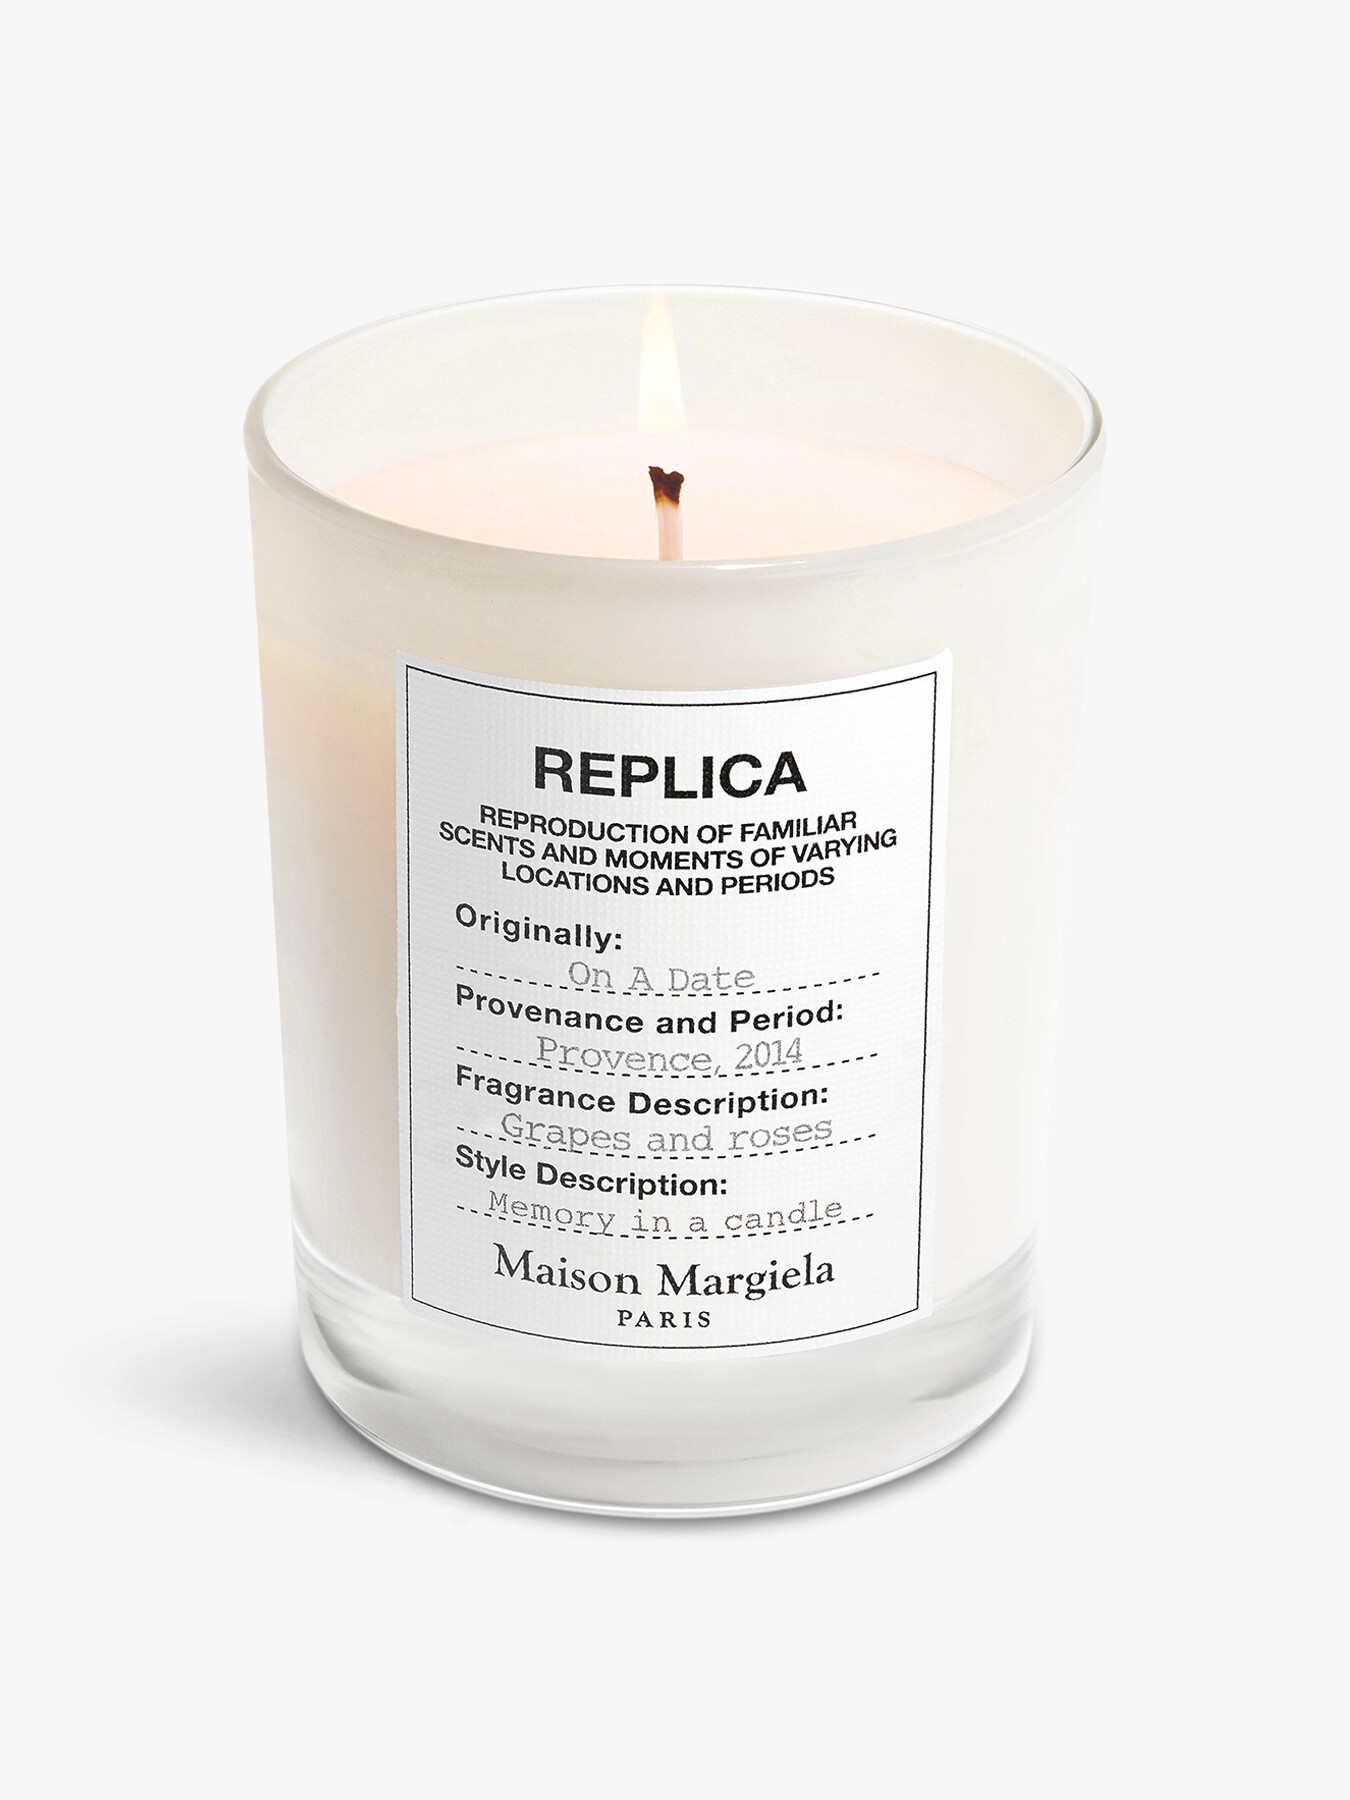 Maison Margiela Replica On A Date Candle 165g | Candles & Diffusers |  Fenwick